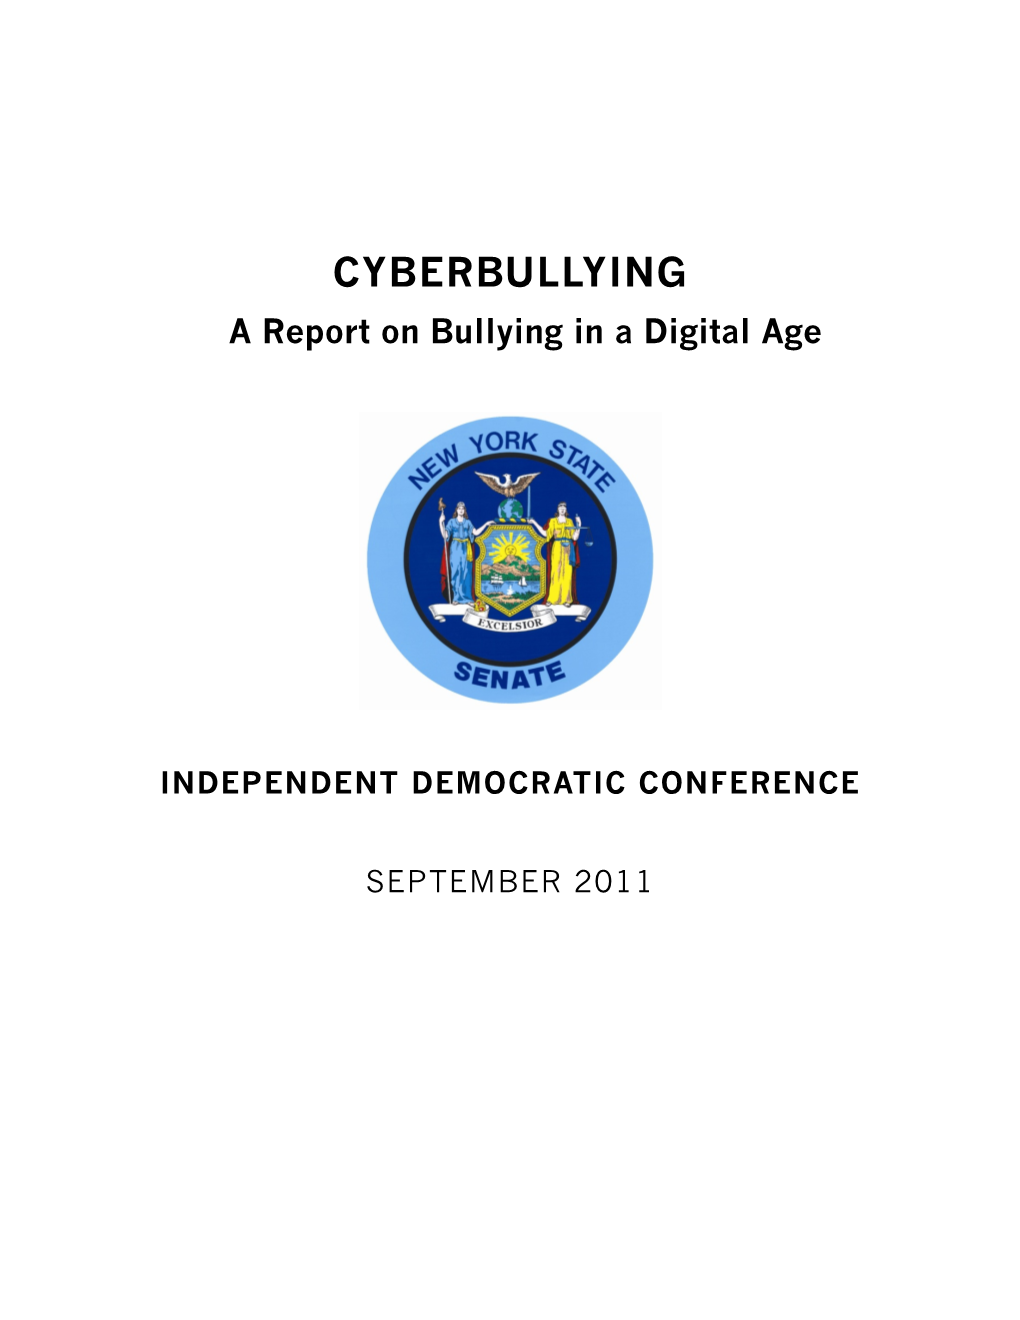 CYBERBULLYING a Report on Bullying in a Digital Age